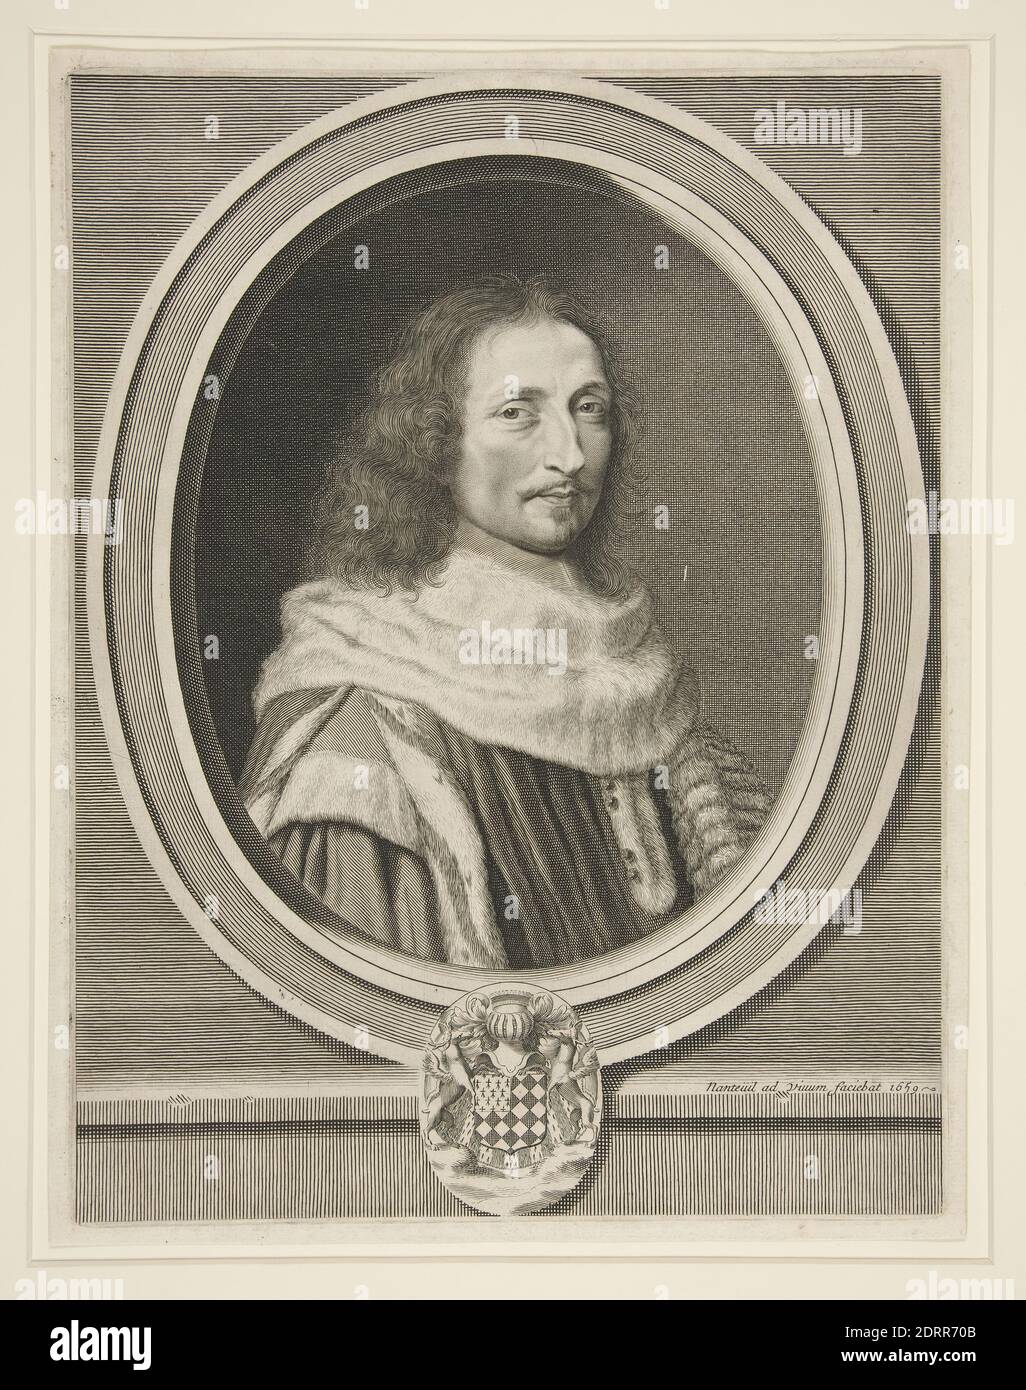 Artist: Robert Nanteuil, French, 1623–1678, Guillaume de Lamoignon, Marquis of Baville, Engraving, platemark: 32.1 × 24.5 cm (12 5/8 × 9 5/8 in.), French, 17th century, Works on Paper - Prints Stock Photo